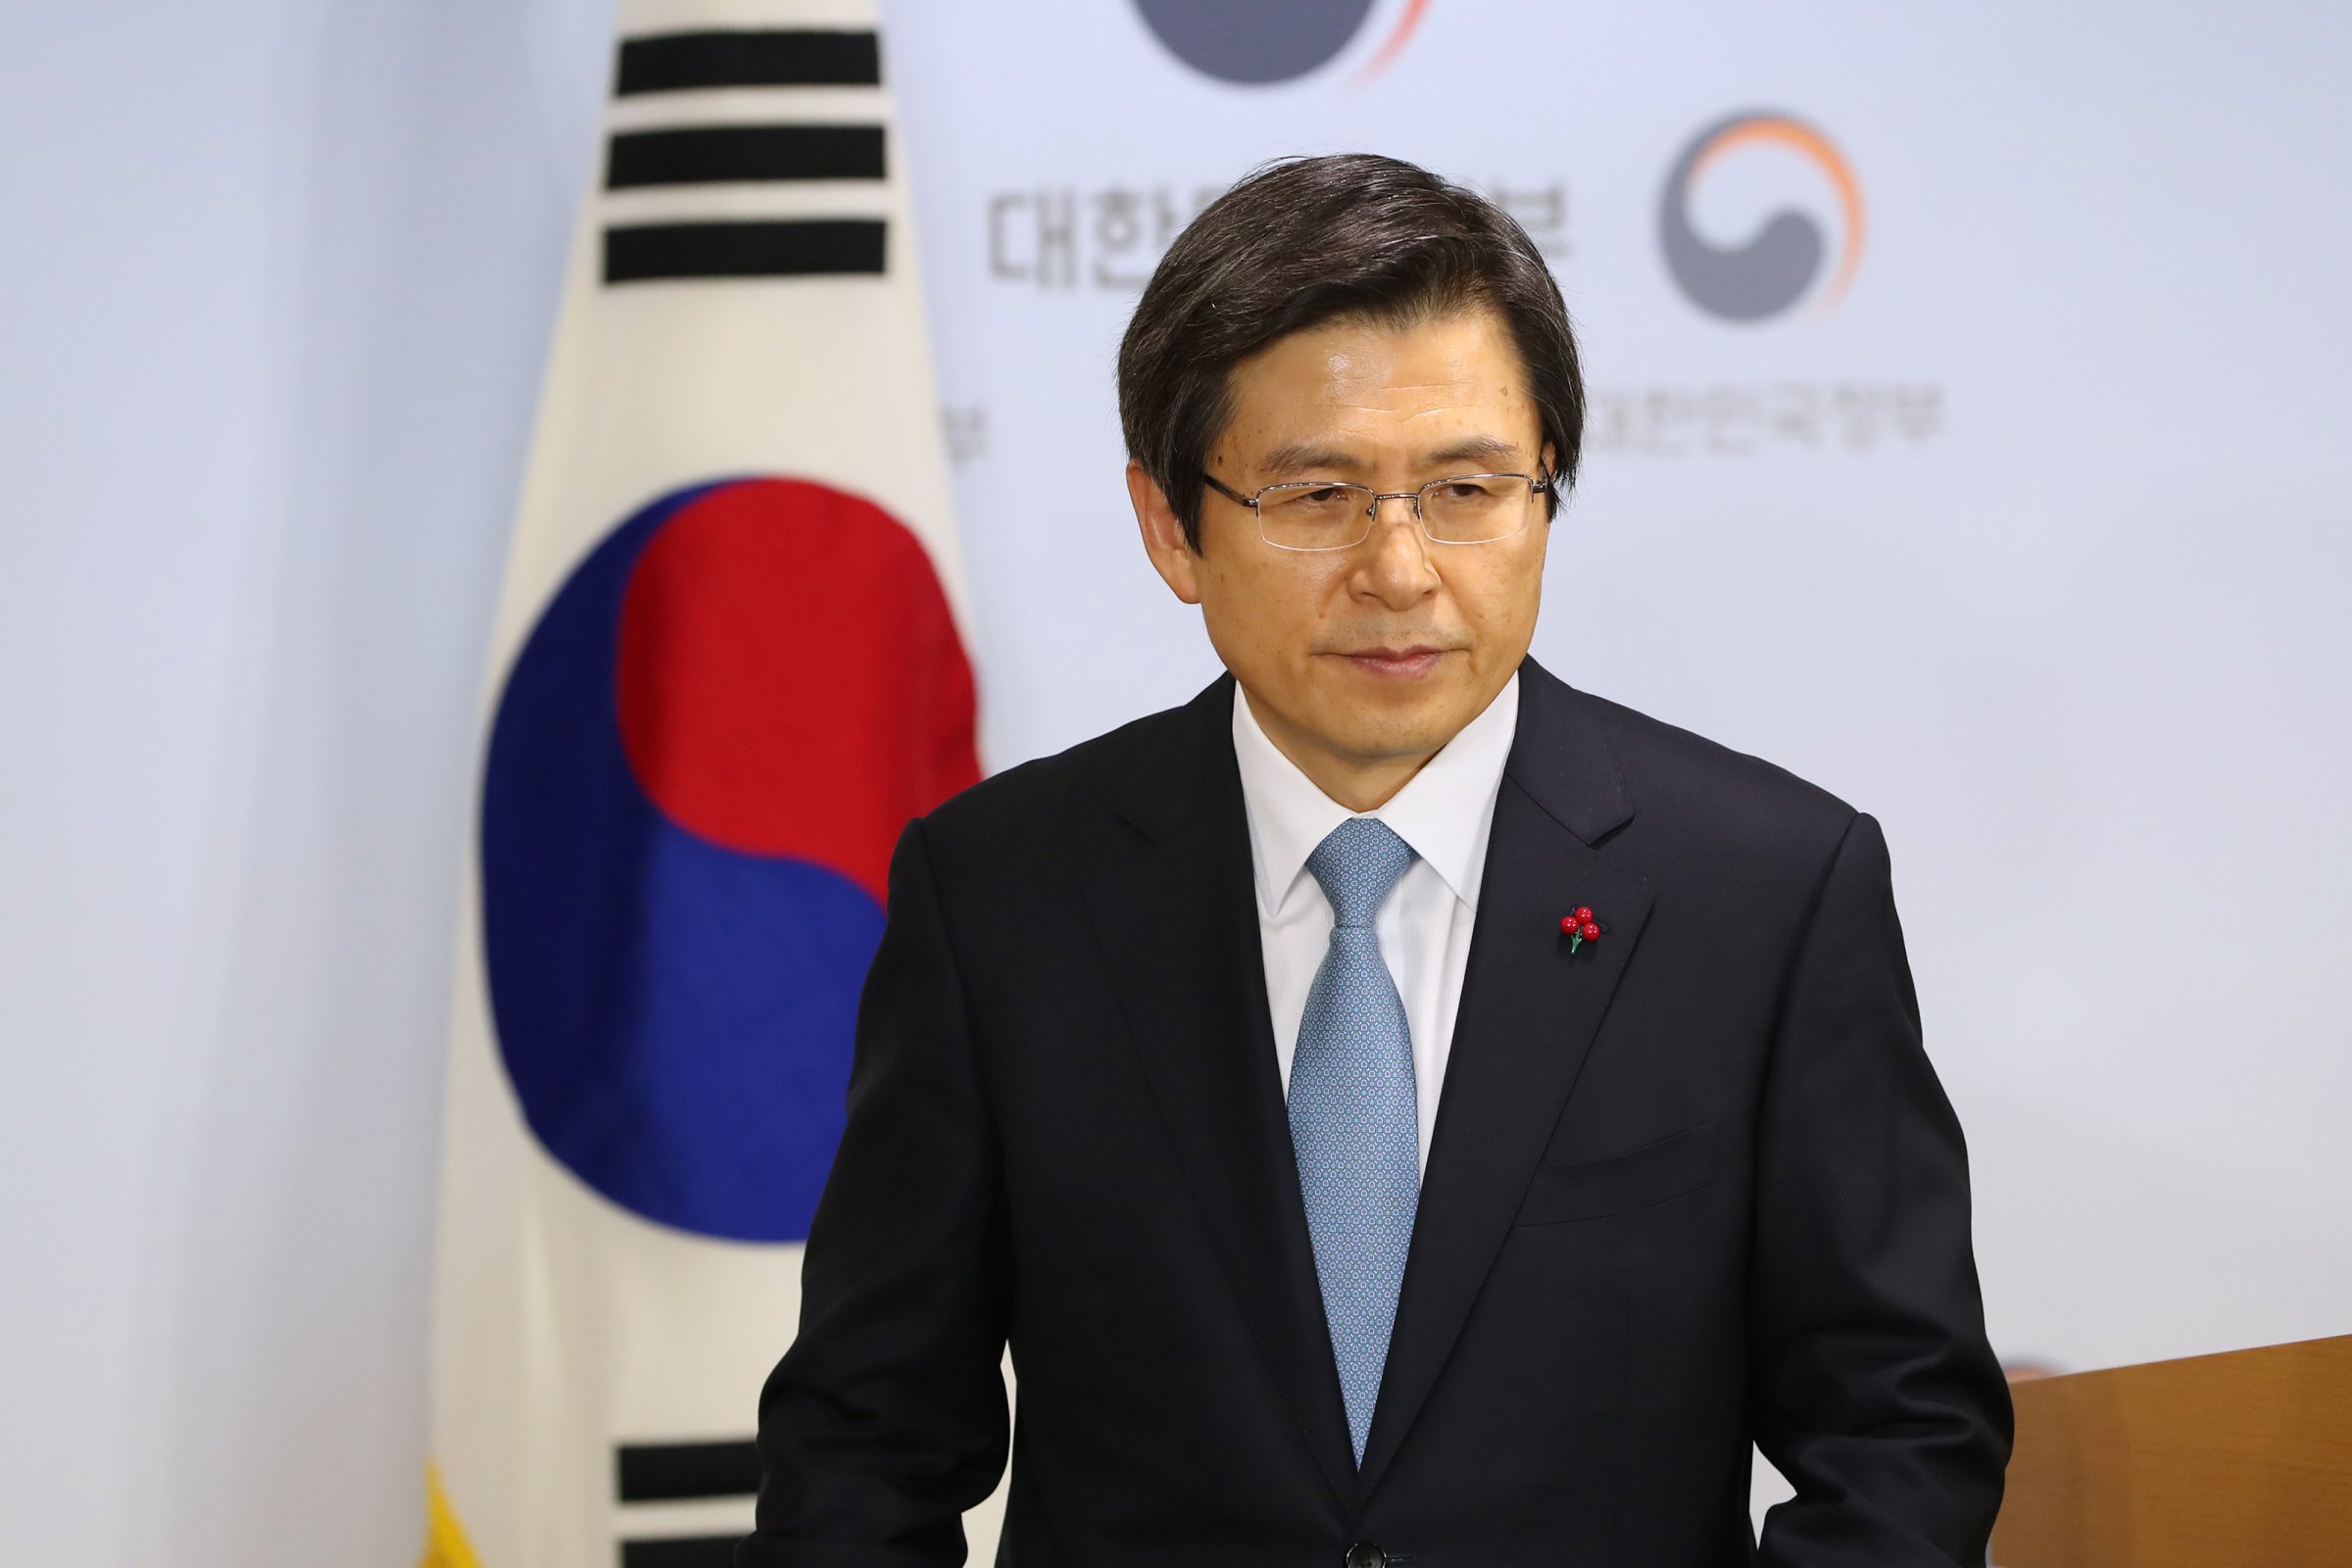 South Korea Prime Minister Hwang Kyo-ahn Speaks At News Conference